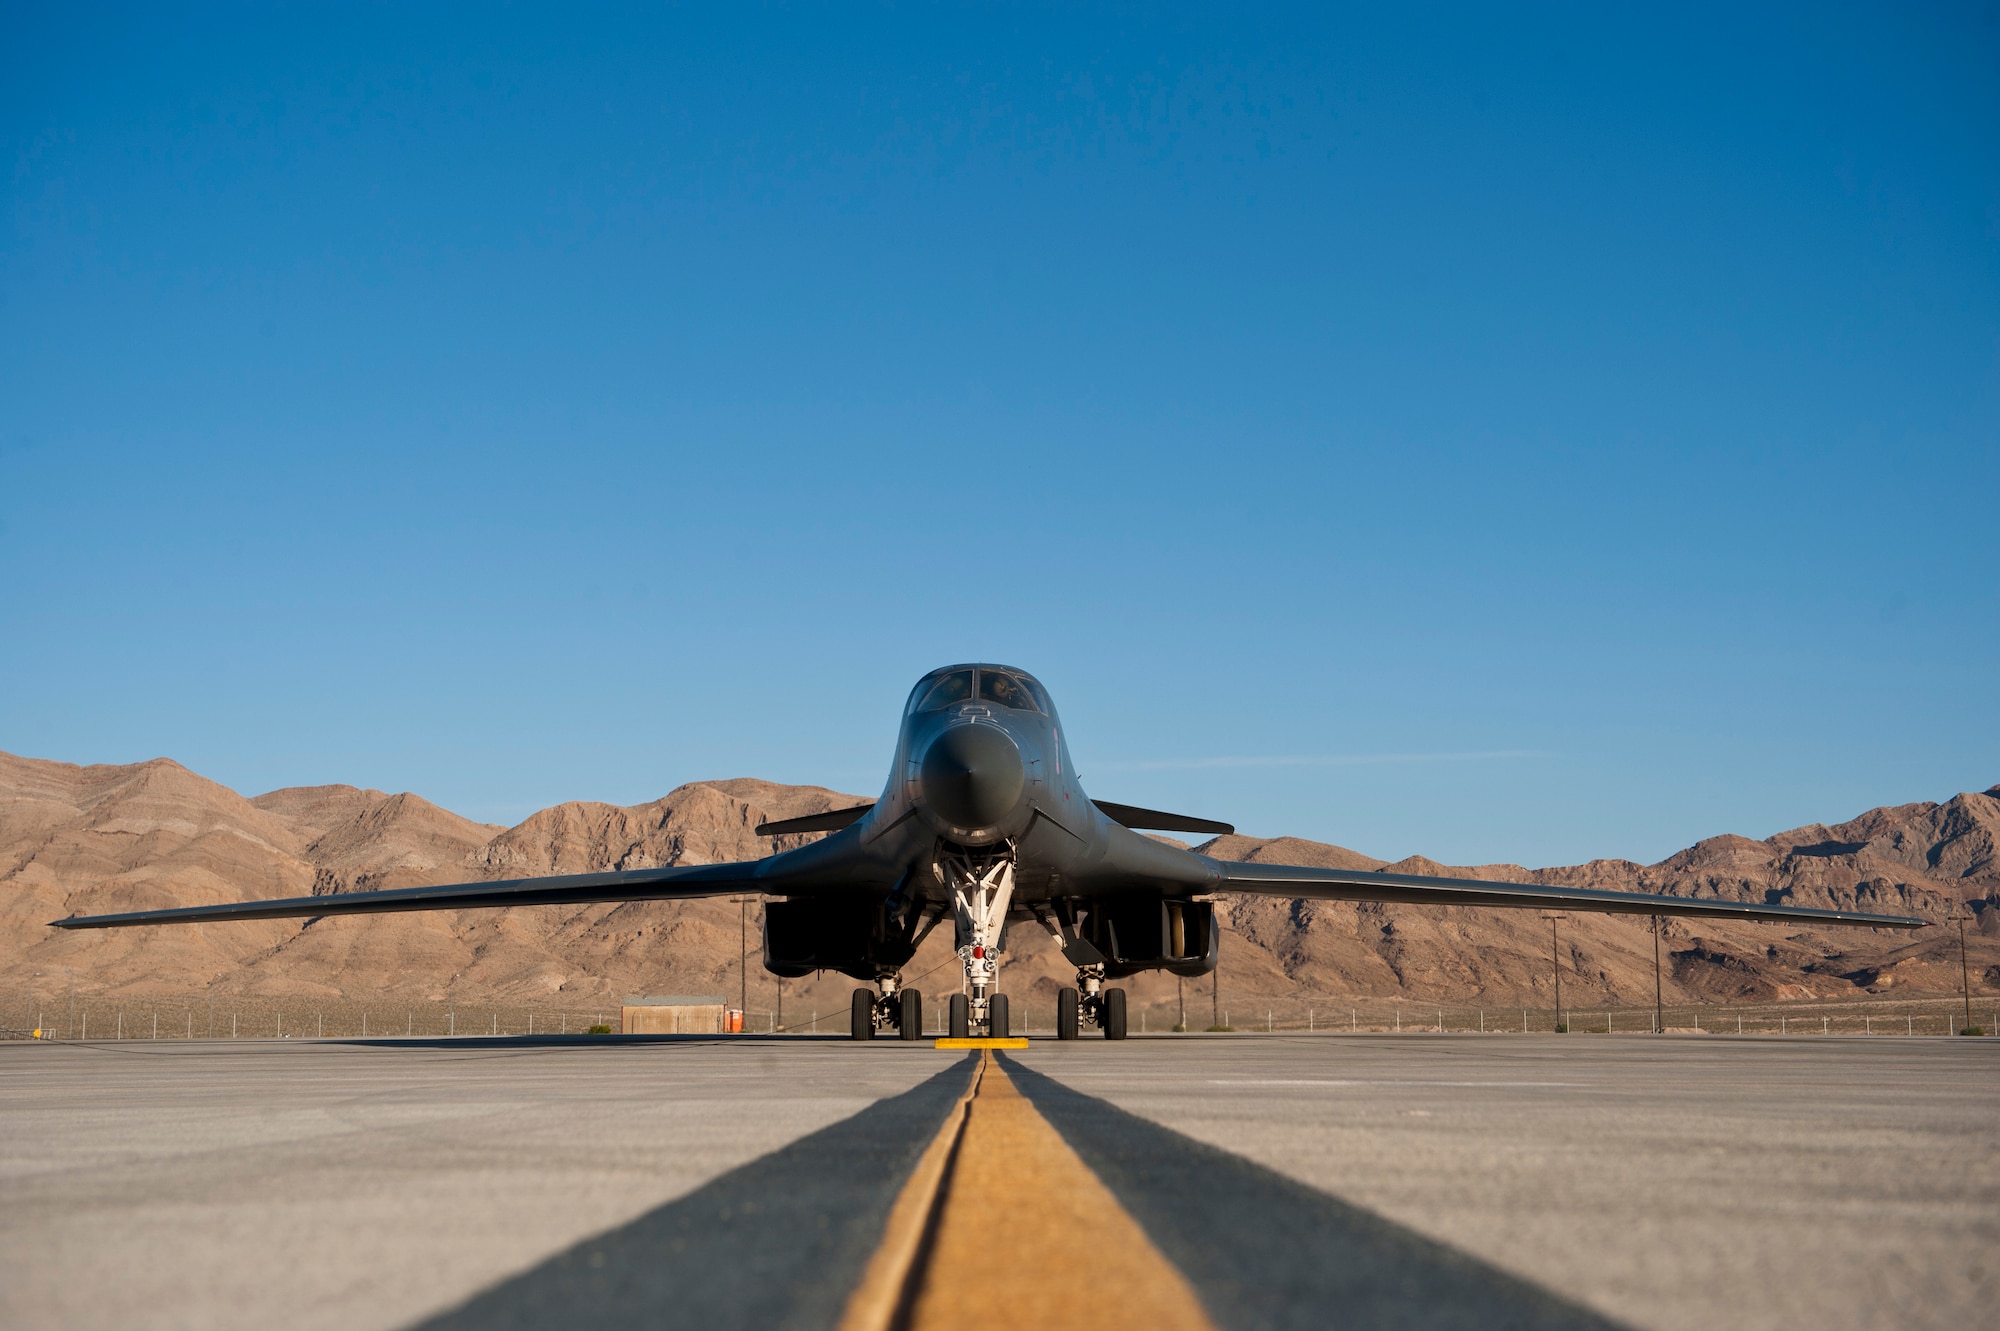 A U.S. Air Force B-1B Lancer assigned to the 7th Bomb Wing, Dyess Air Force Base, Texas waits to taxi to the runway during Green Flag 14-6 April 24, 2014, at Nellis Air Force Base, Nev. The B-1B Lancer is a multi-role bomber aircraft capable of carrying a 75,000 pound payload and delivering its precision and non-precision weapons on any target in the world at any time. (U.S. Air Force photo by Airman 1st Class Thomas Spangler)